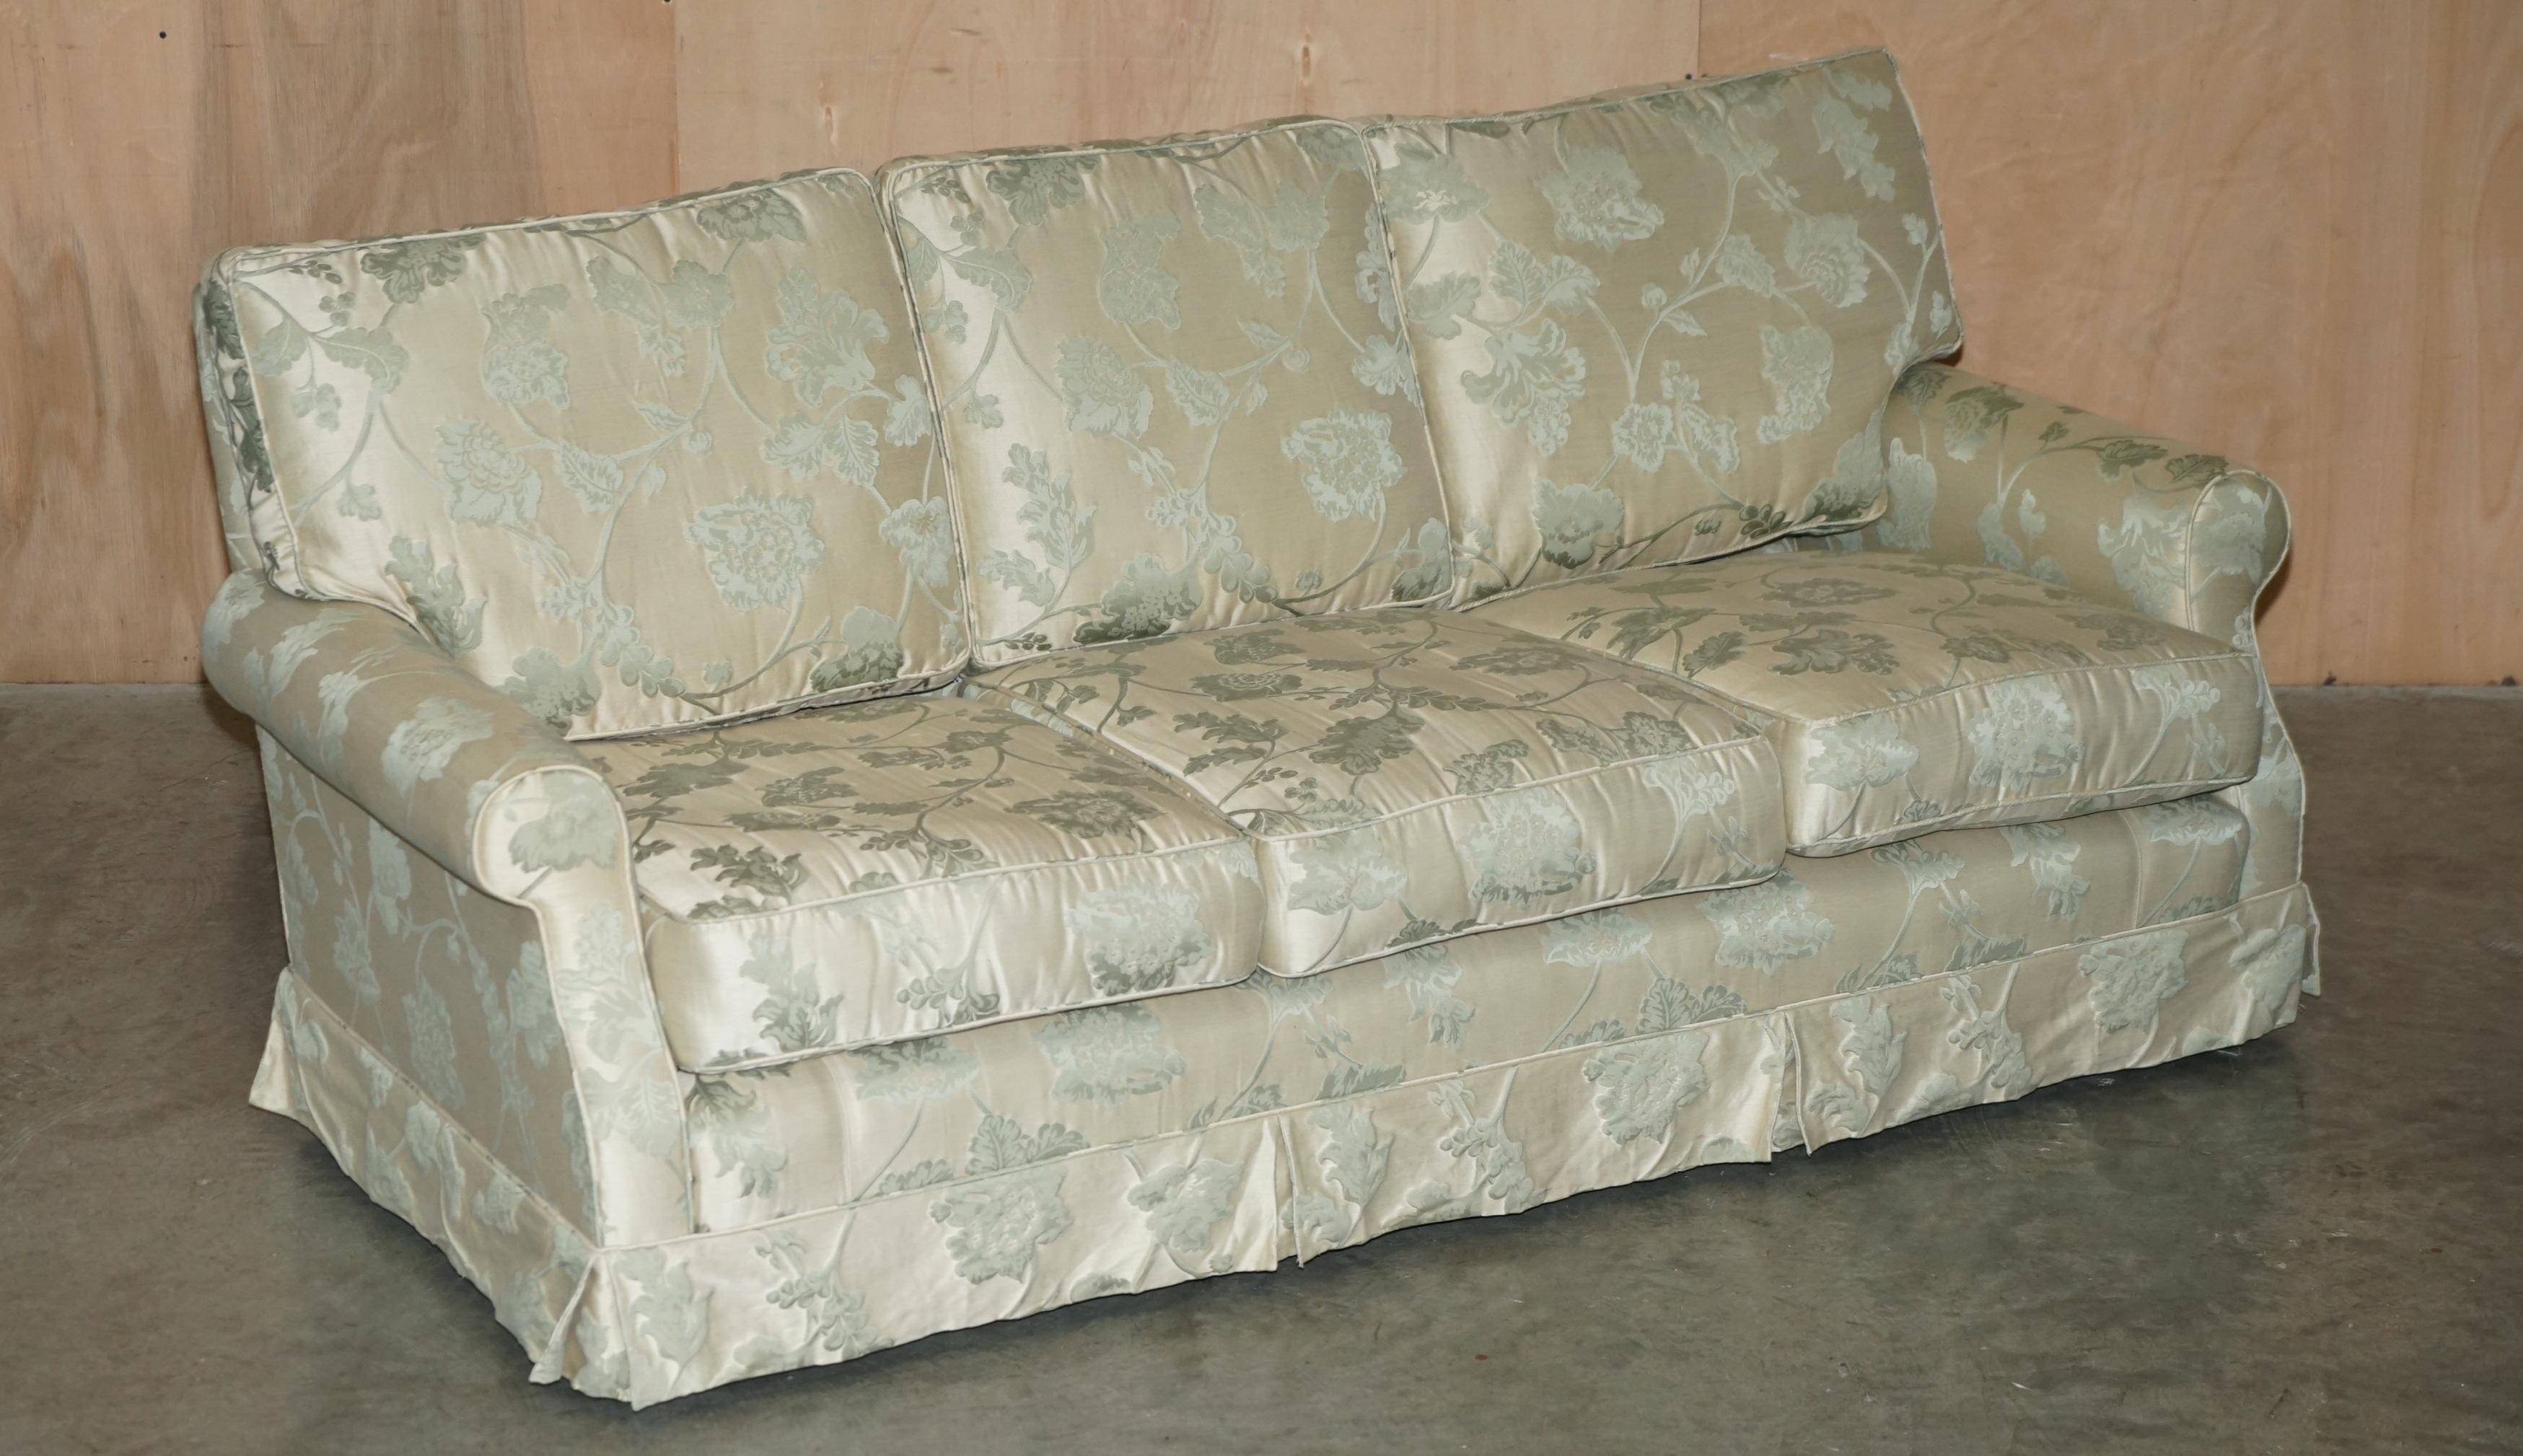 Royal House Antiques

Royal House Antiques is delighted to offer for sale this lovely pair of Floral Silk blend upholstered three seat Howard & Son's style sofas 

Please note the delivery fee listed is just a guide, it covers within the M25 only